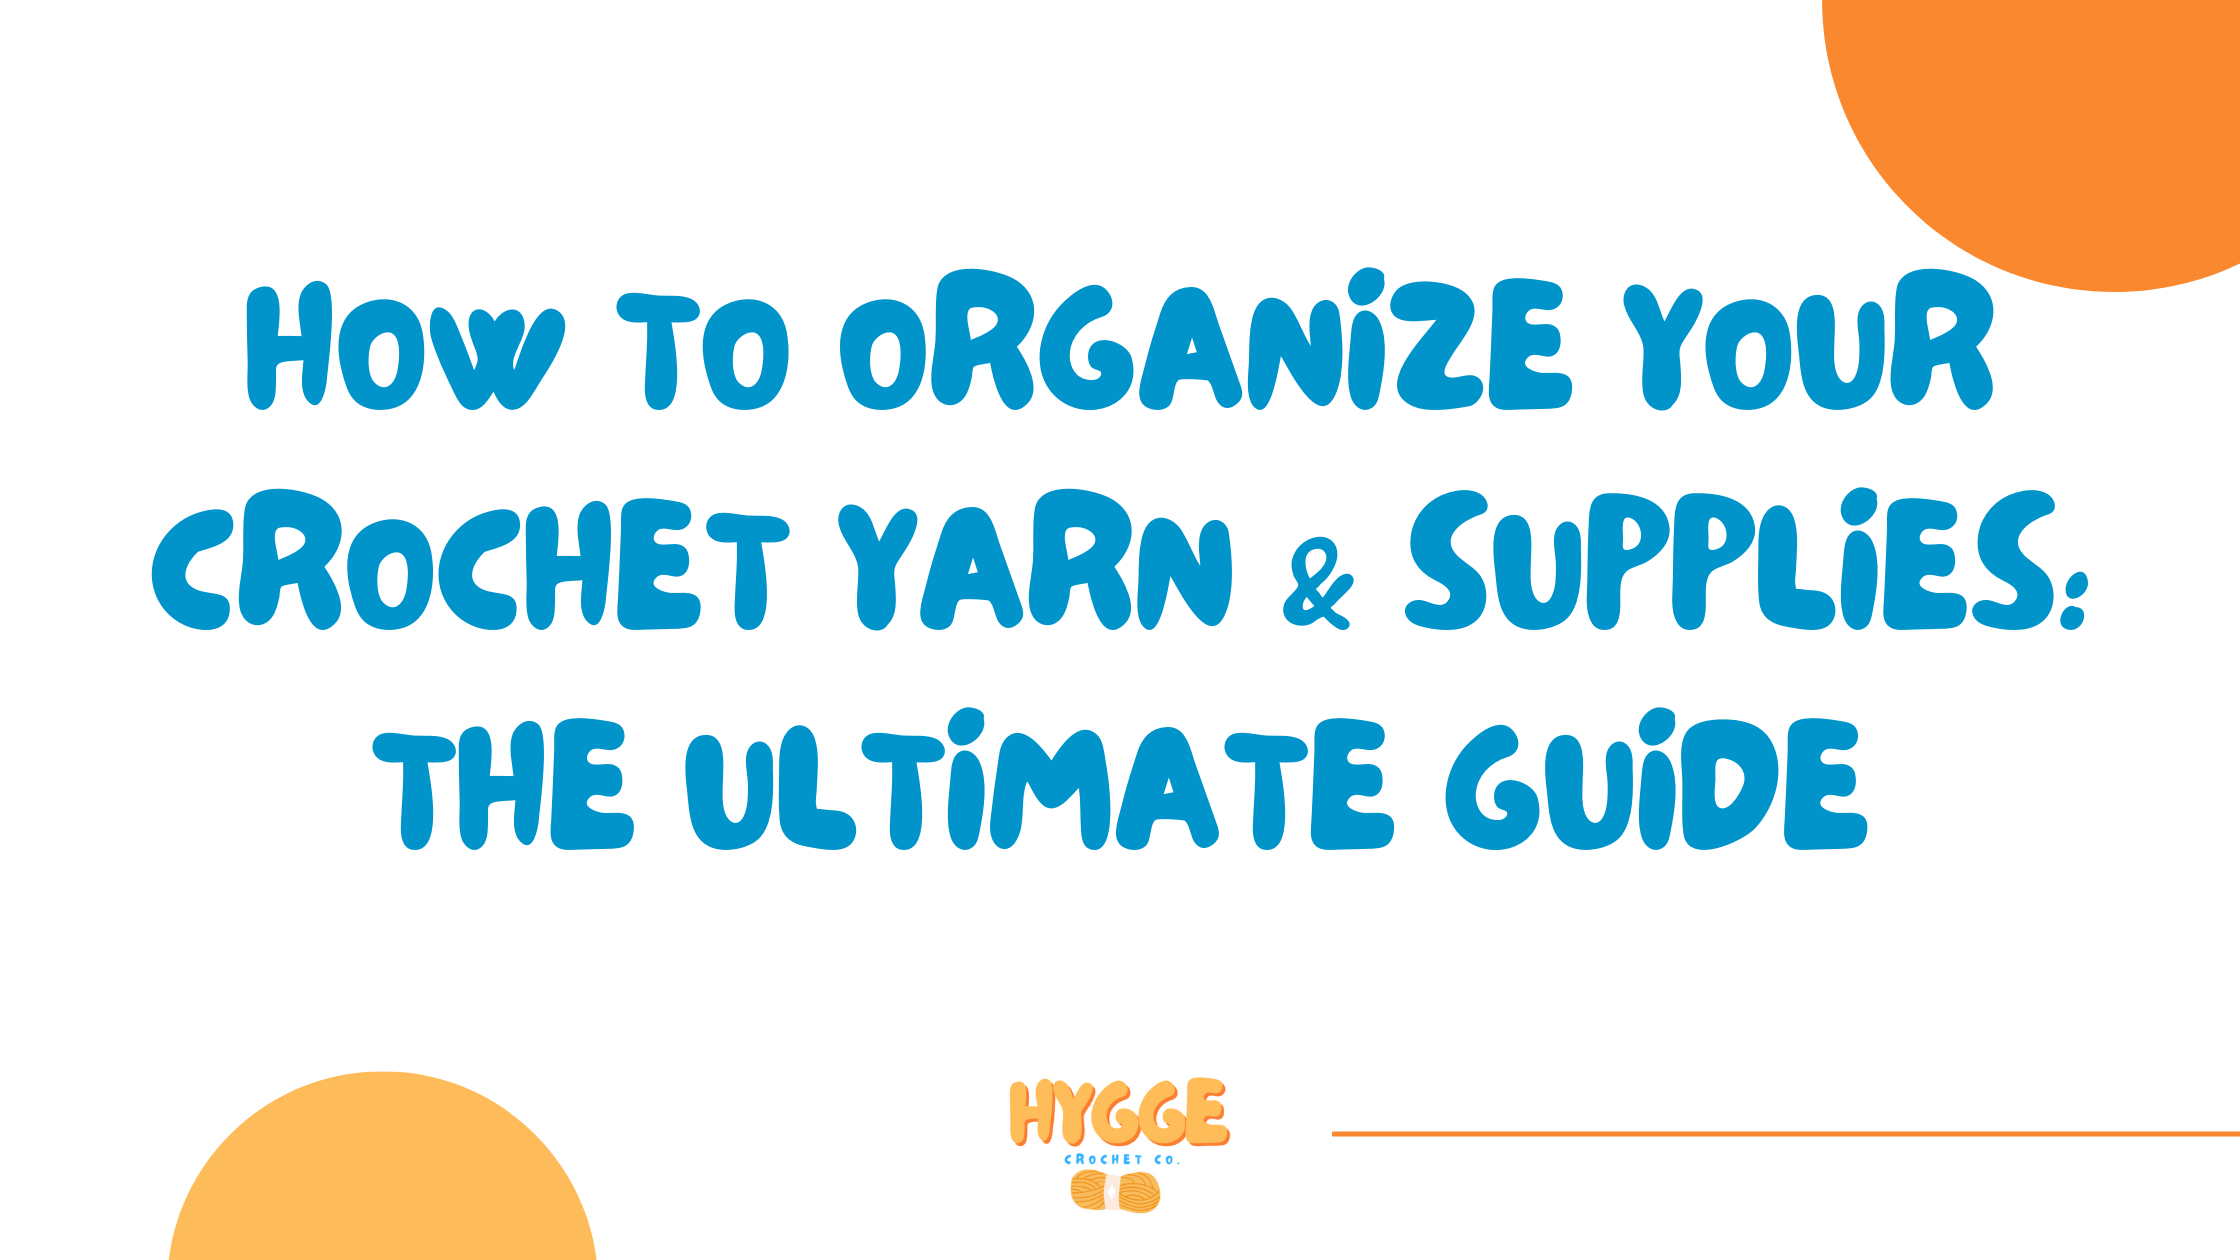 How to Organize Your Crochet Yarn & Supplies: The Ultimate Guide